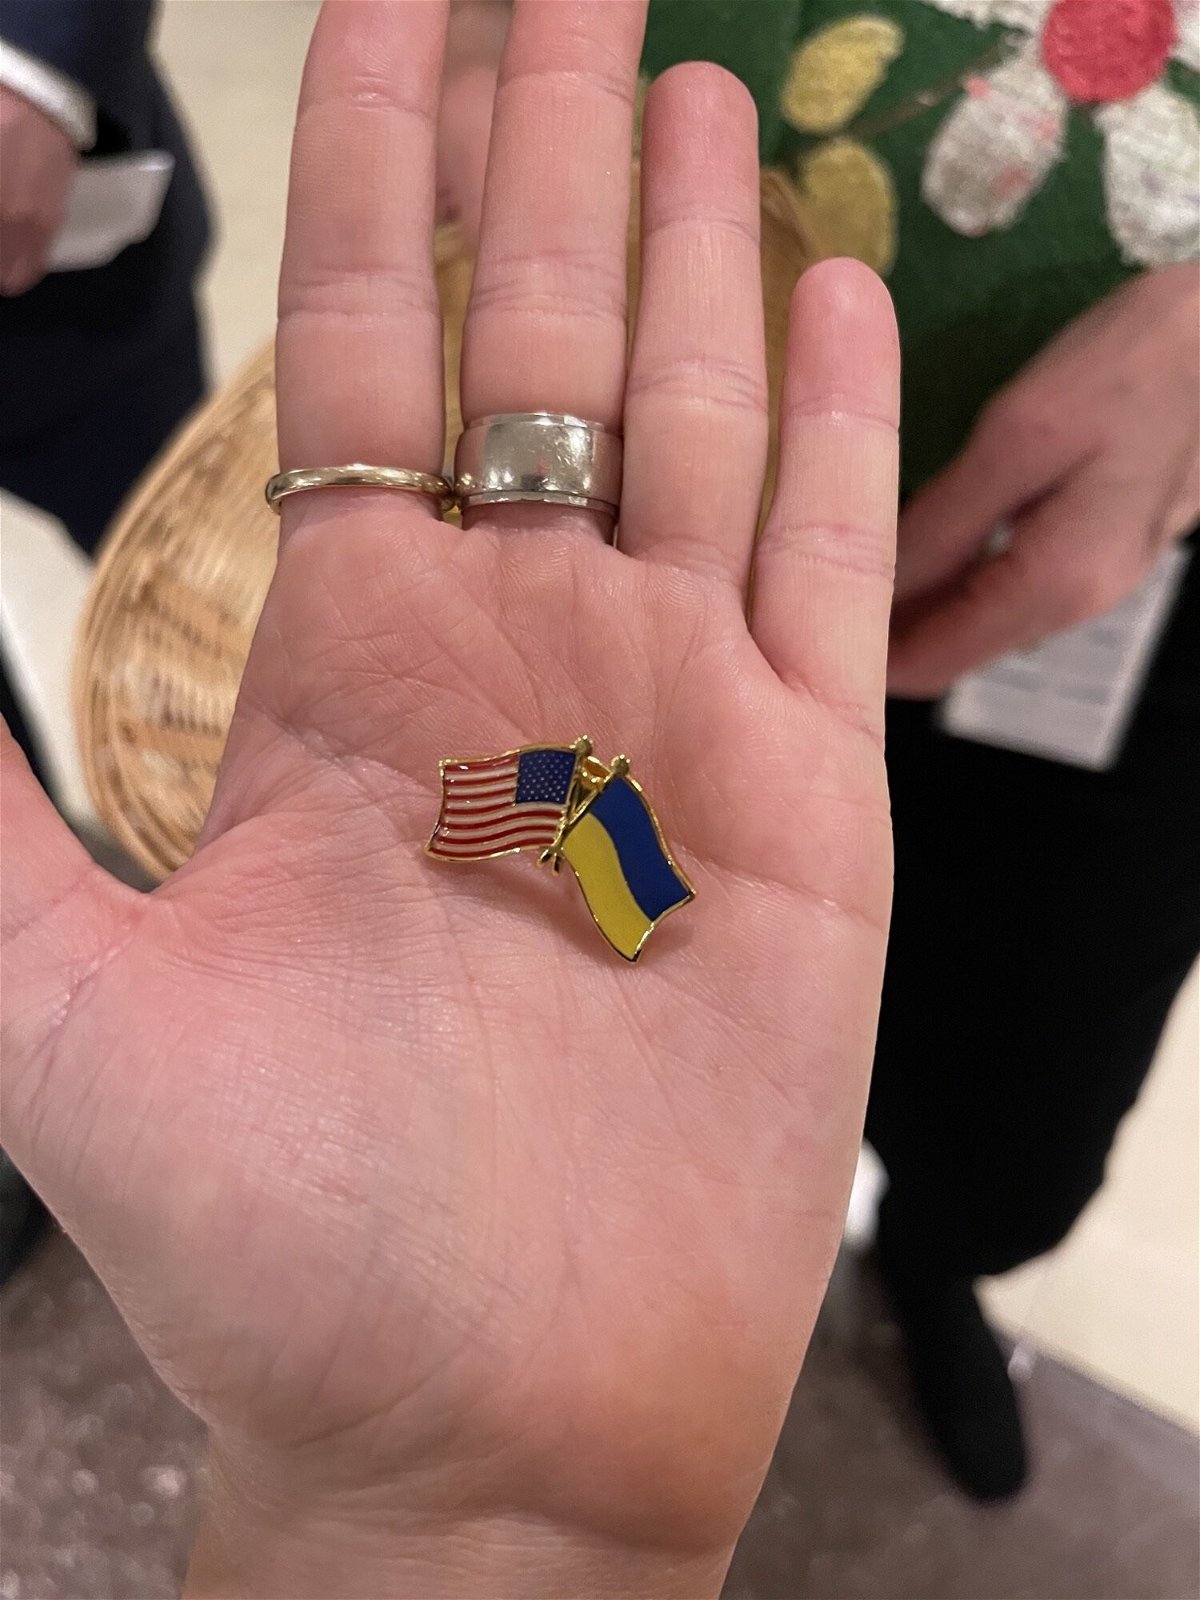 <i>Daniella Diaz/CNN</i><br/>Capitol staffer handed out Ukraine-US flag pins to lawmakers attending Zelensky's address at the Capitol on March 16.